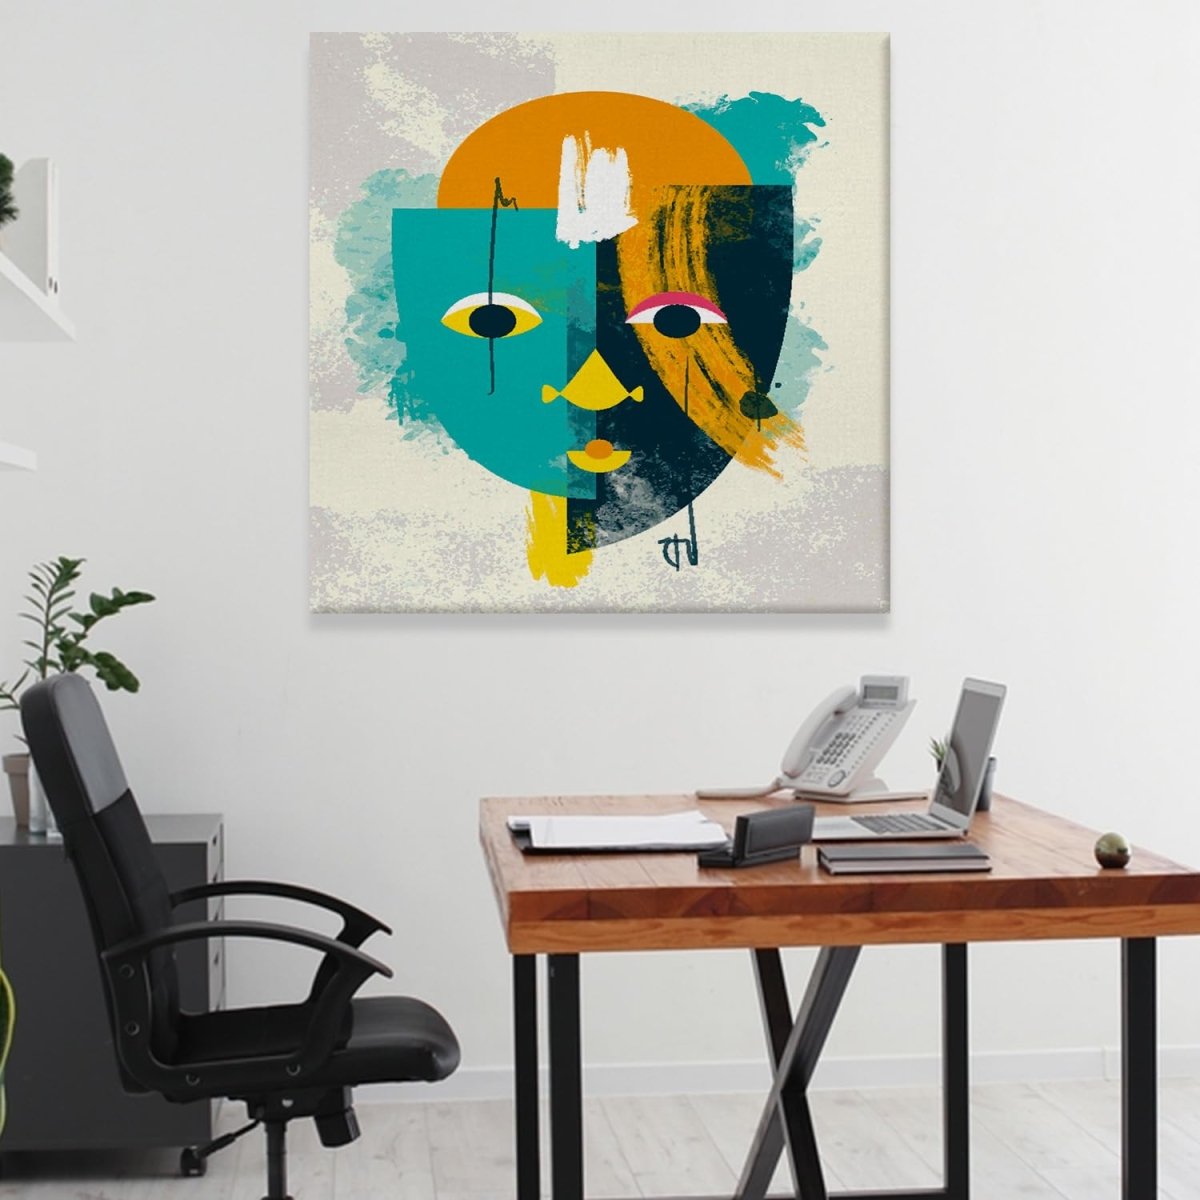 A Study in Angles Canvas Wall Art (36 x 36 Inches)